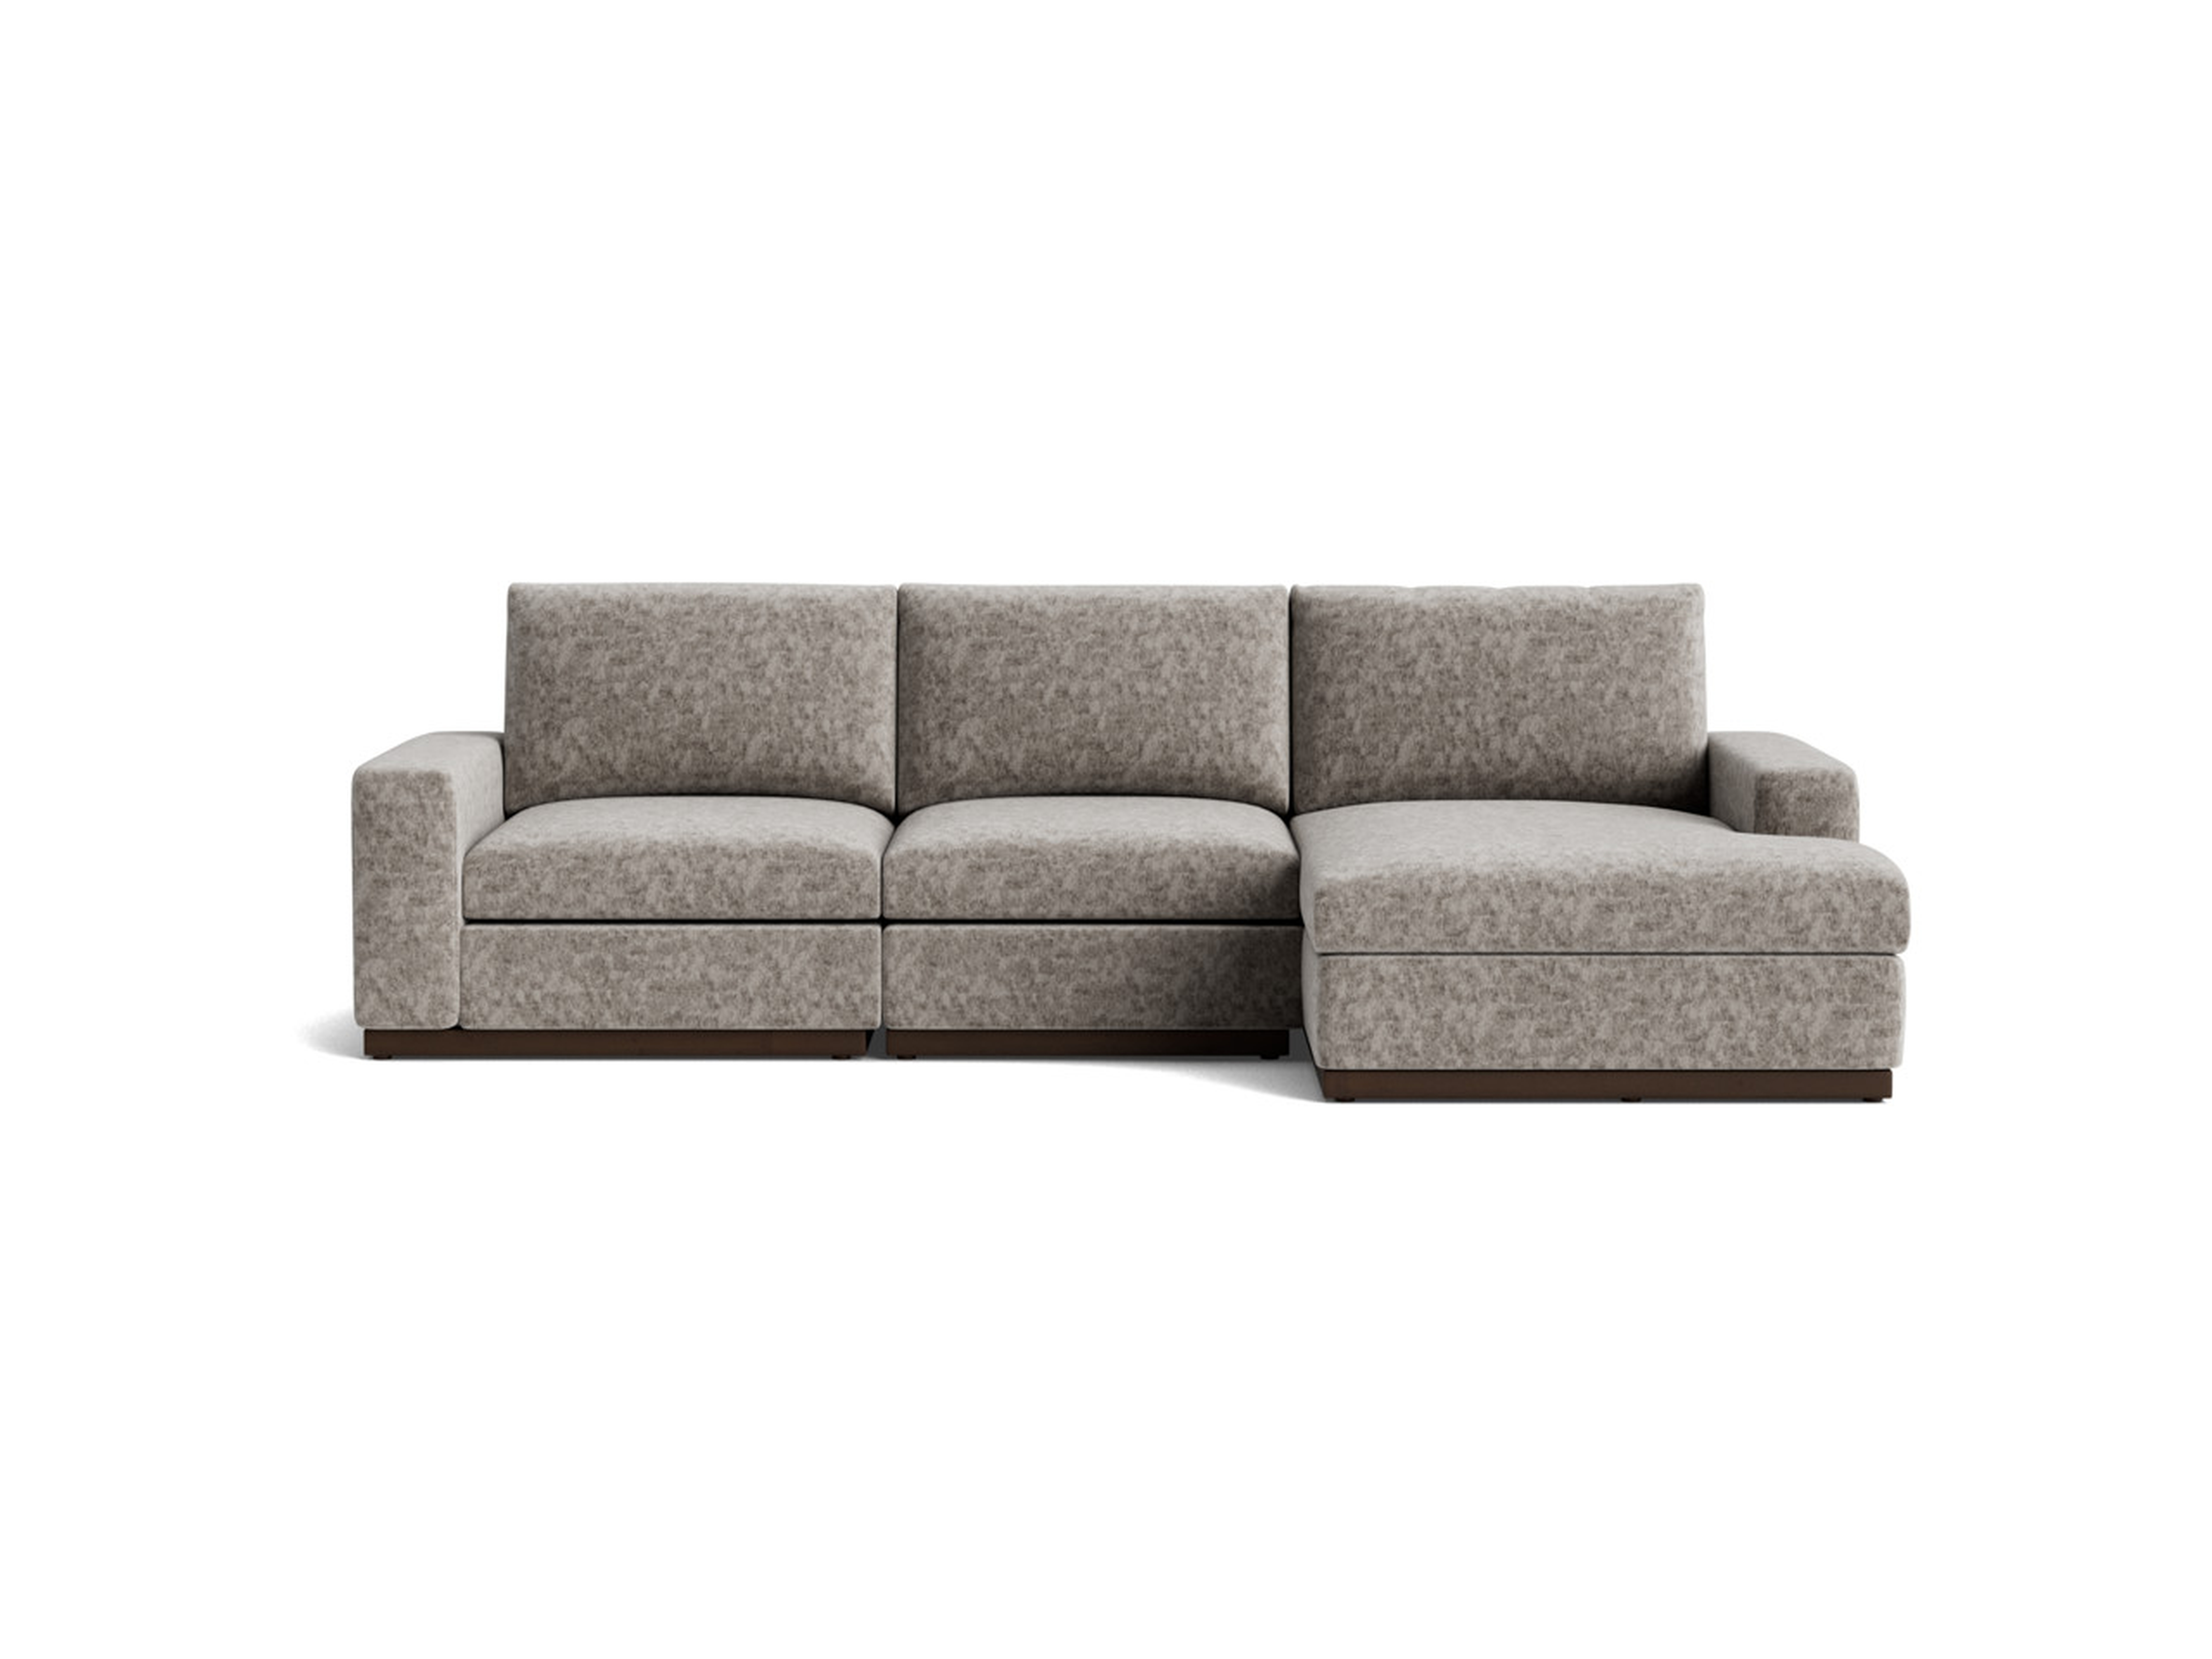 Holt Modular Sectional in Prime Stone, right arm chaise - Joybird